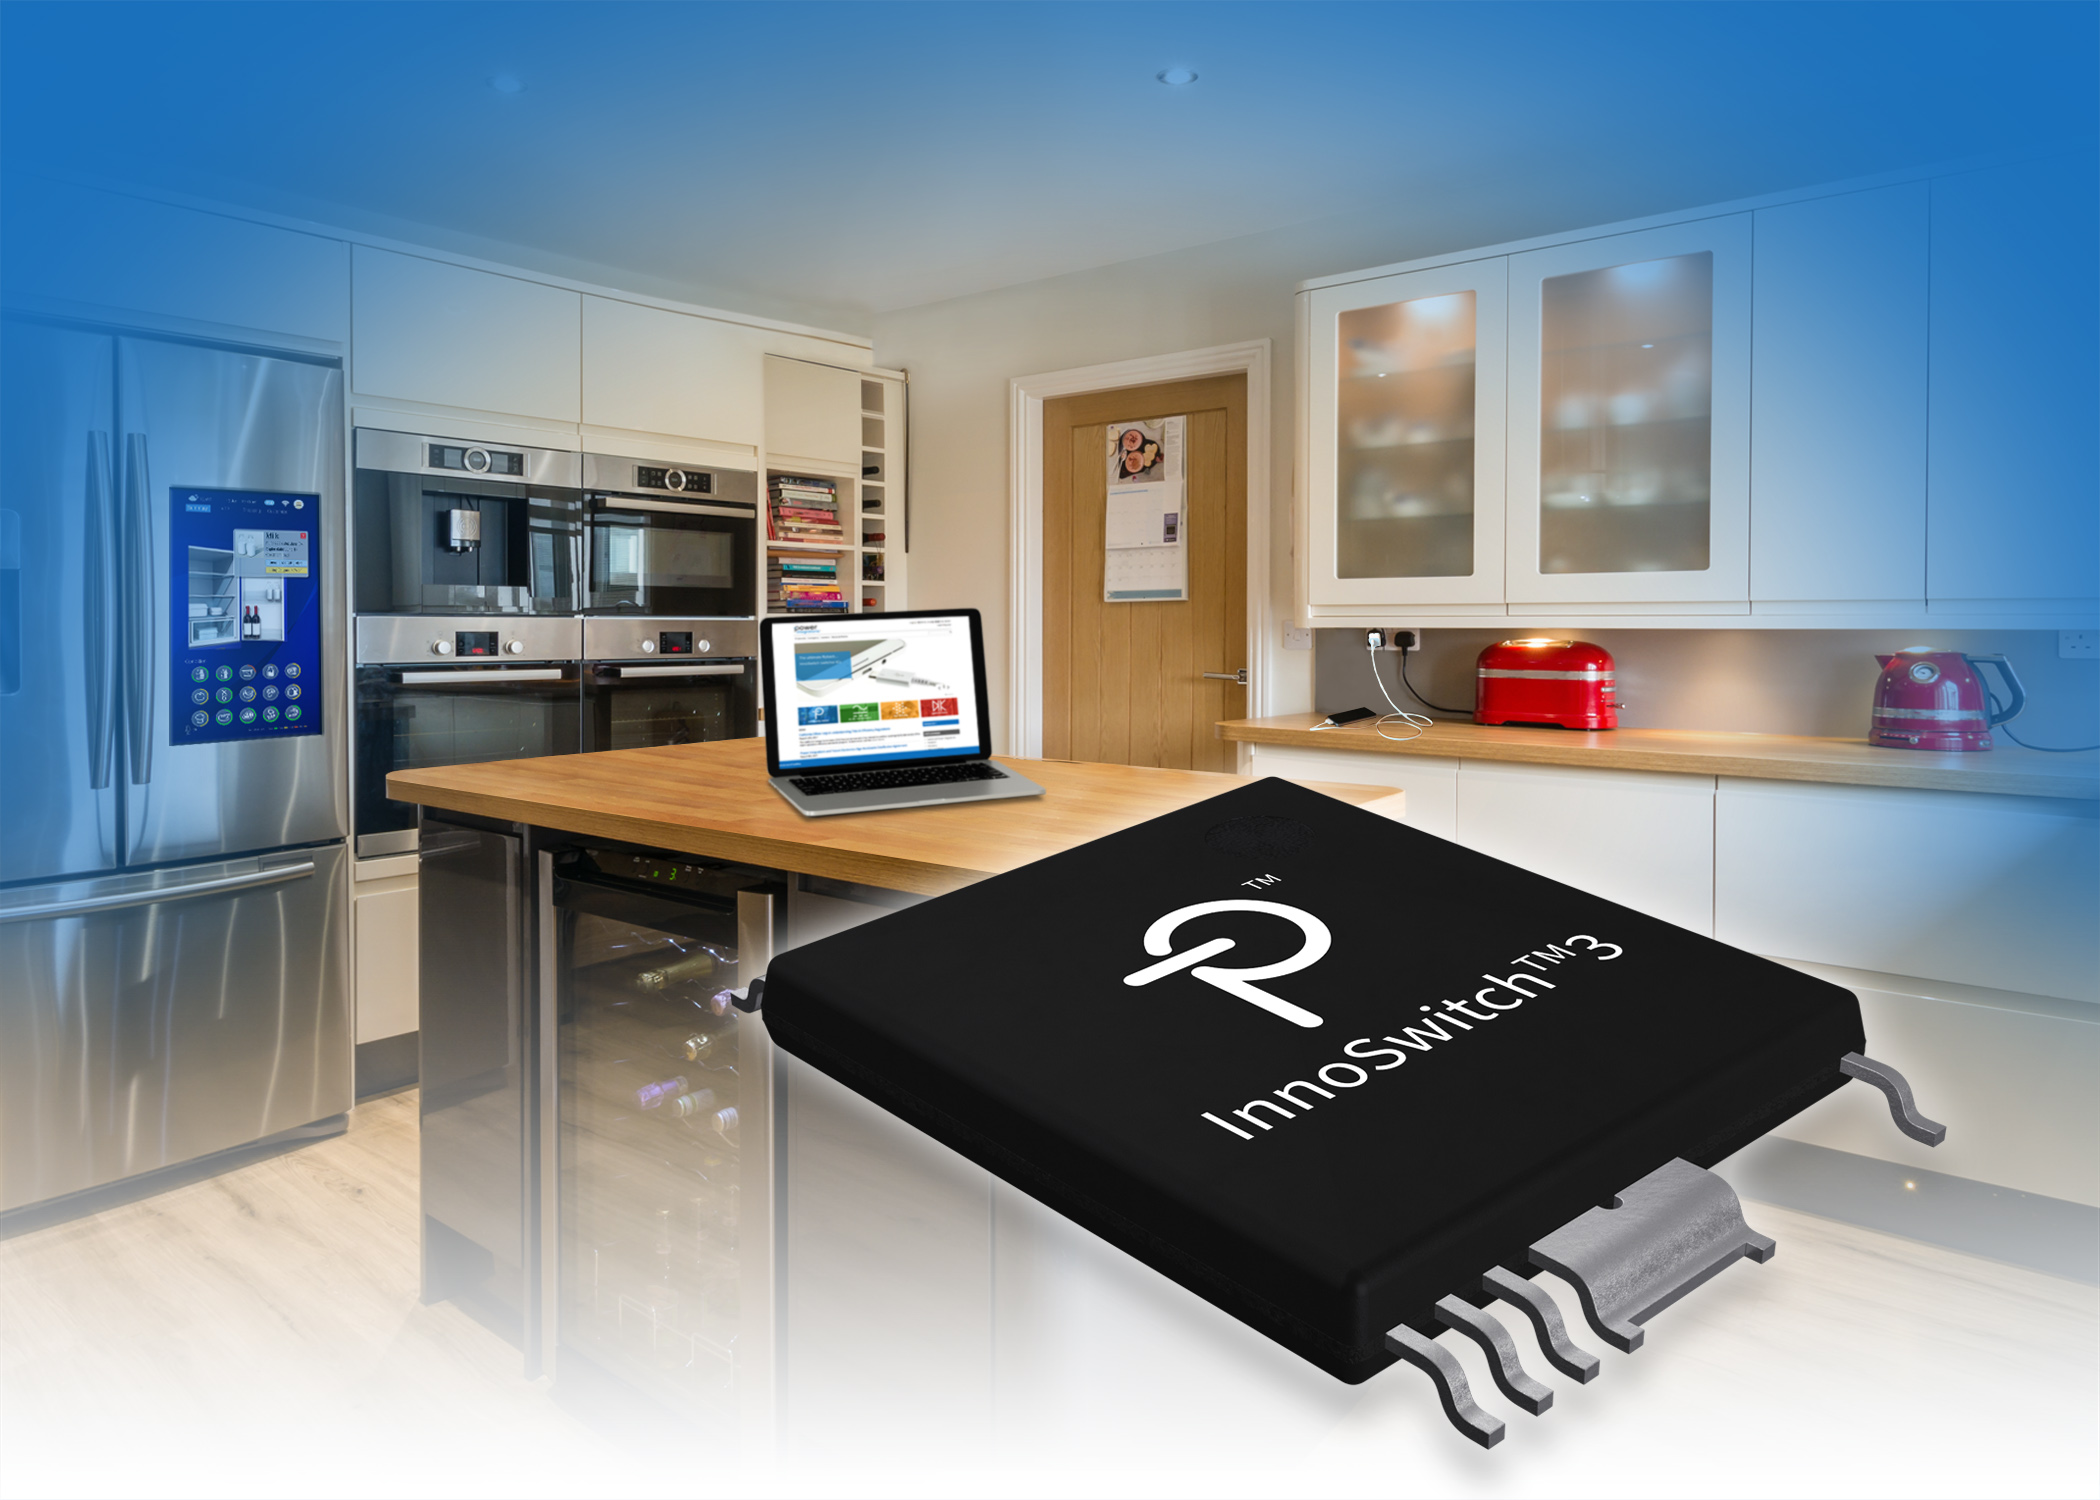 Integrated Switcher ICs Cut Losses by 25%, Deliver 94% Efficiency